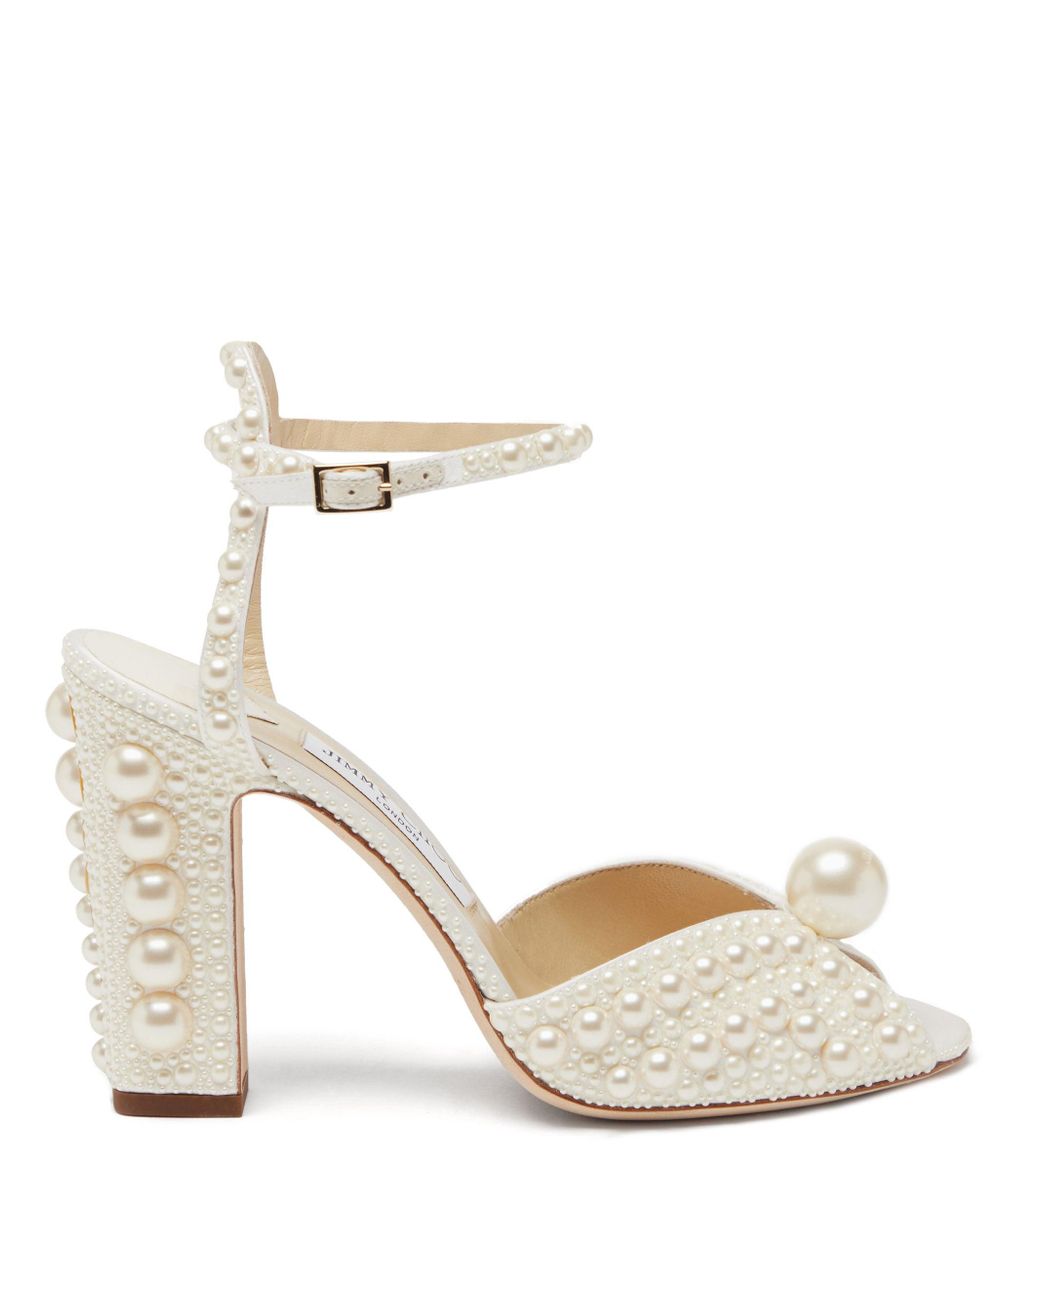 Jimmy Choo Sacaria Faux-pearl Embellished Sandals in White | Lyst